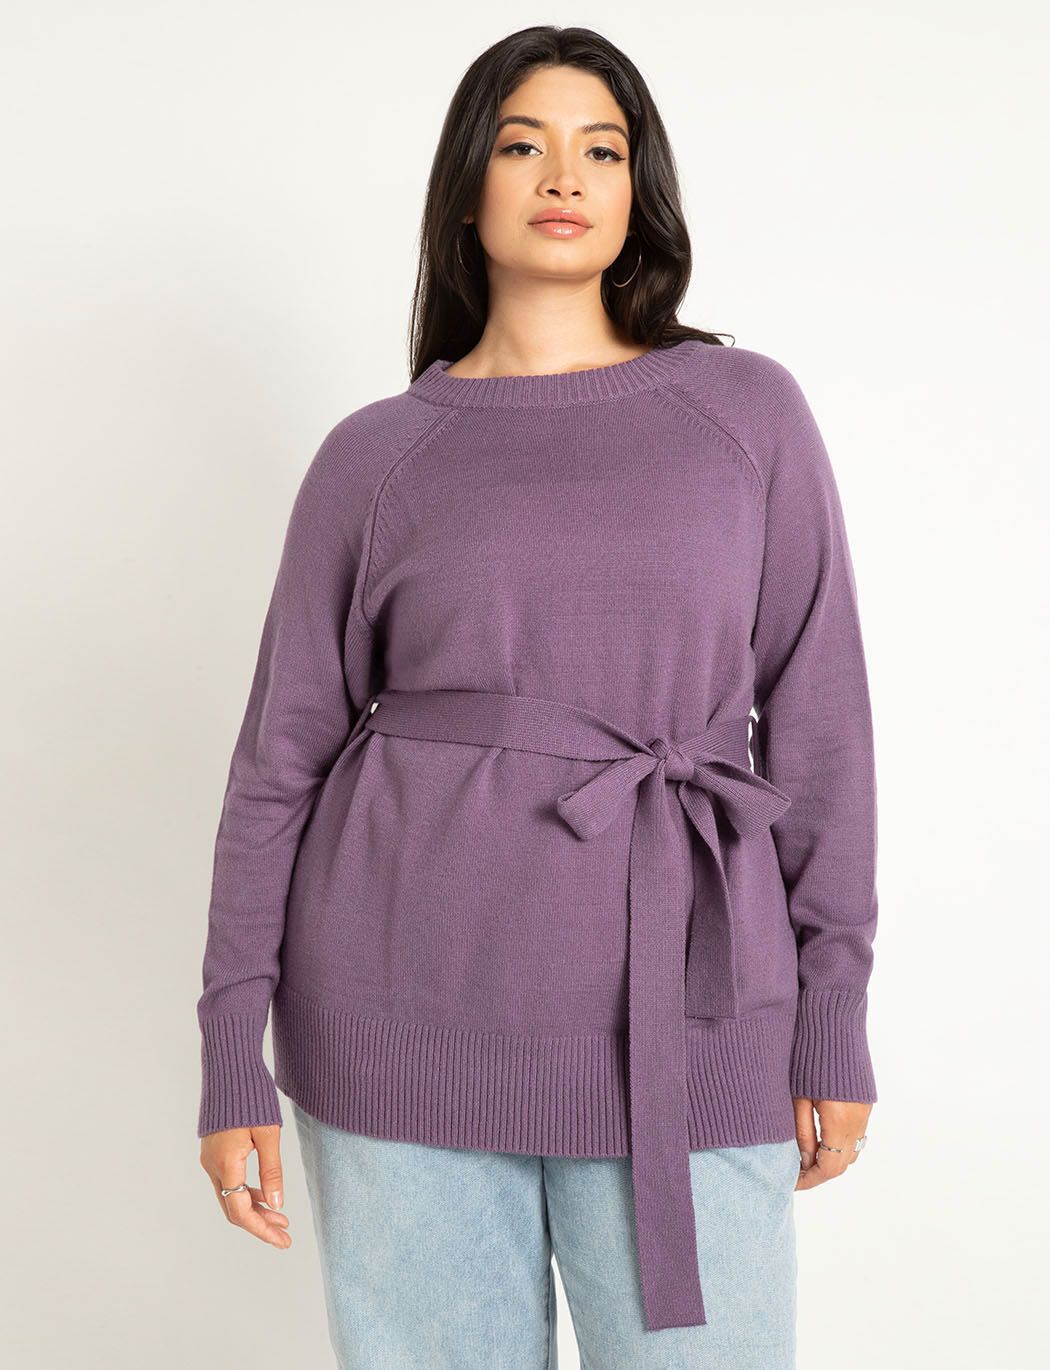 Plus Size Crew Neck Sweater Fitted Ribbed Belted Raglan Sleeves Tunic